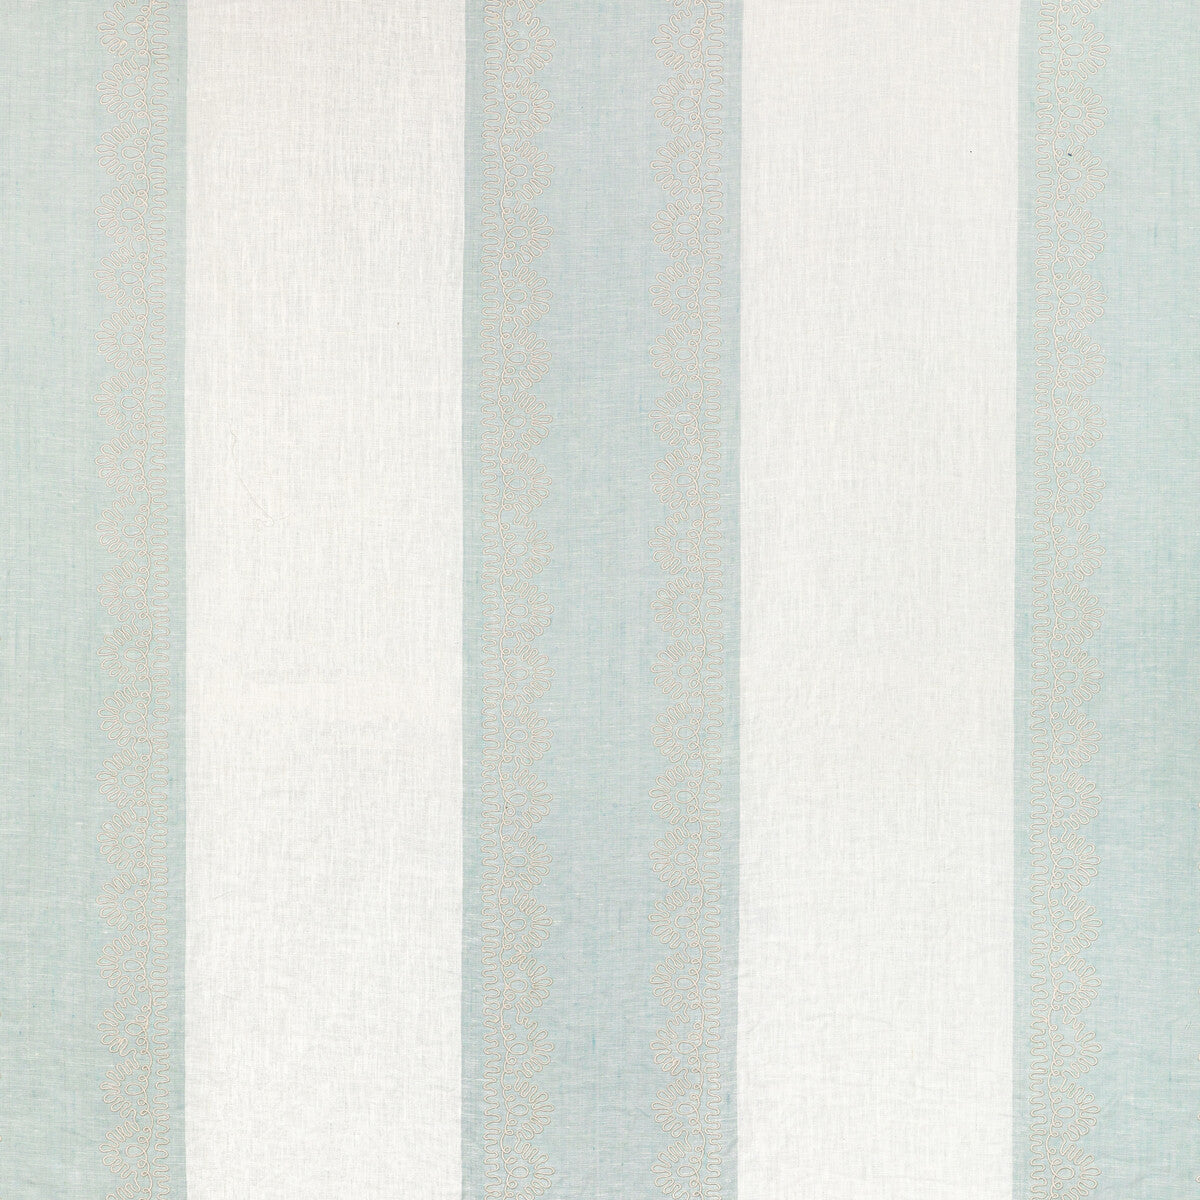 Banner Sheer fabric in aqua color - pattern 2021123.13.0 - by Lee Jofa in the Summerland collection